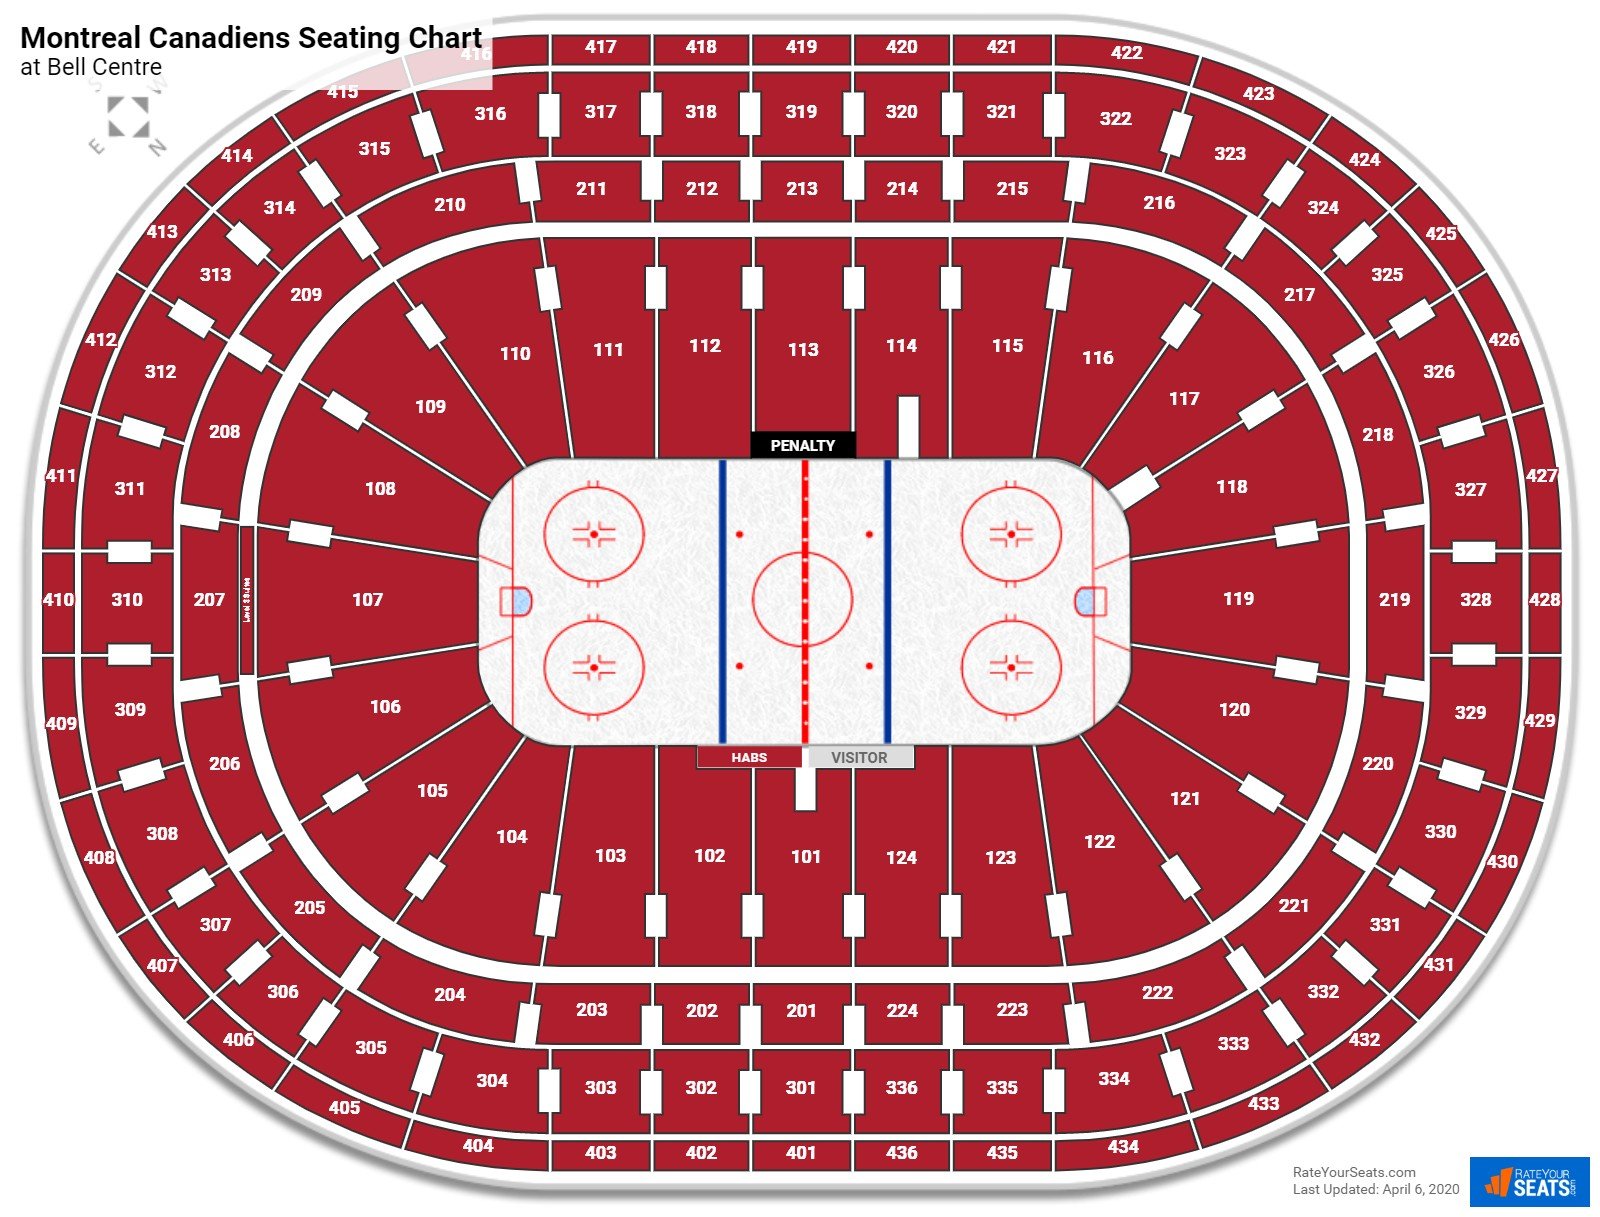 fret Critical Believer Bell Centre Seating Charts - RateYourSeats.com